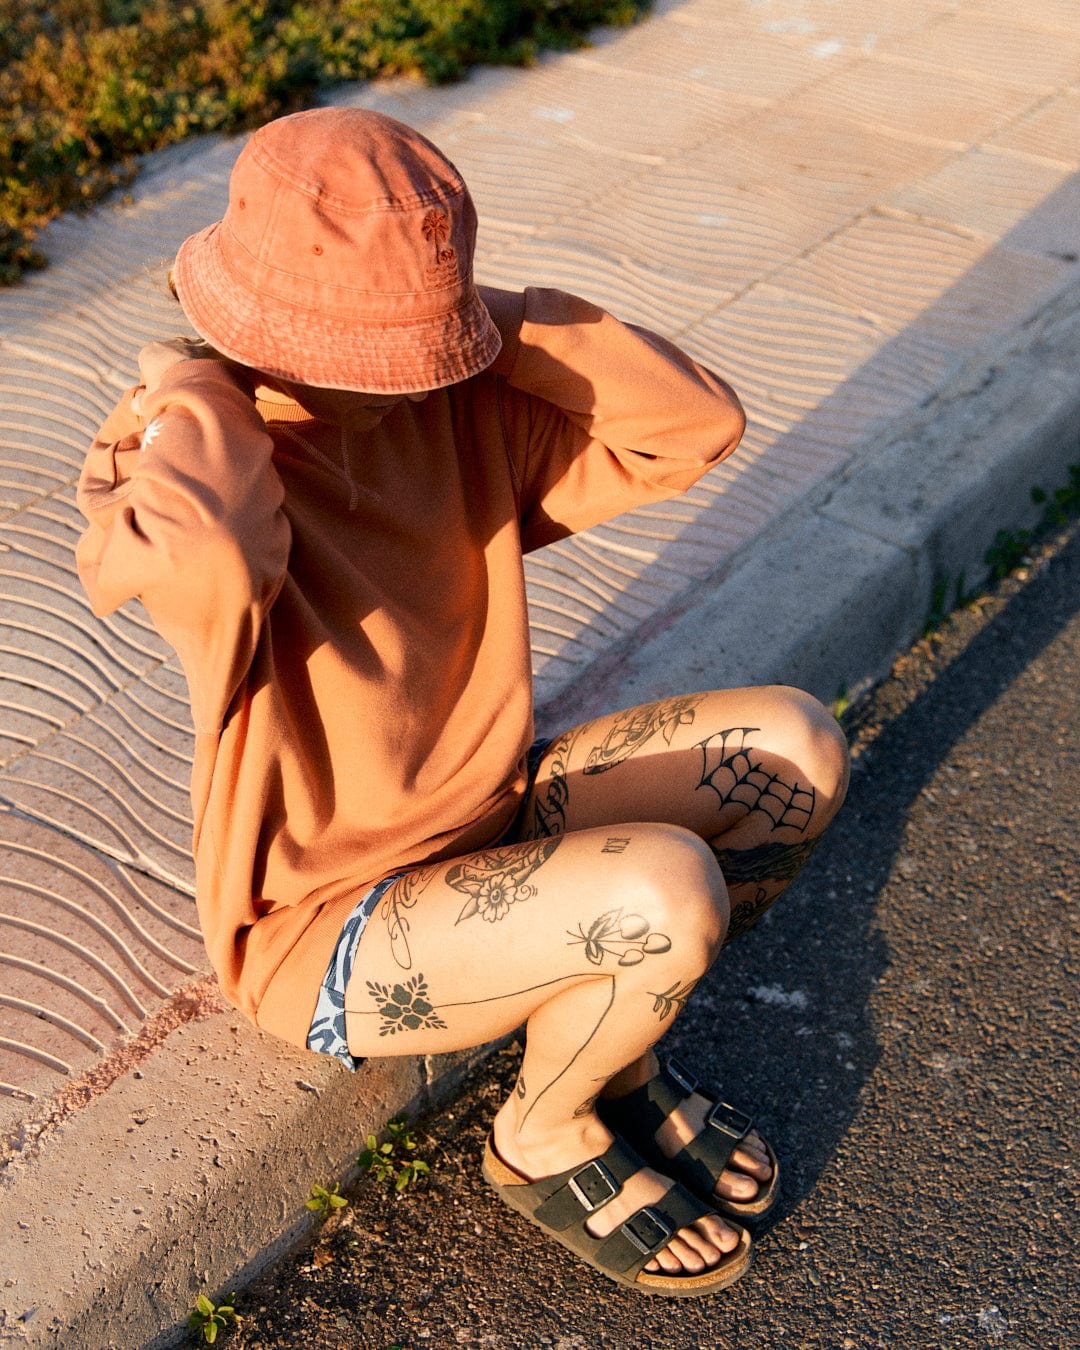 Person wearing an orange bucket hat and matching sweatshirt, sitting on the curb. The relaxed fit Saltrock Journey - Womens Sweatshirt - Peach is 100% cotton and features embroidered graphics. Legs are tattooed with various designs, including a spiderweb and flowers. Wearing black sandals.